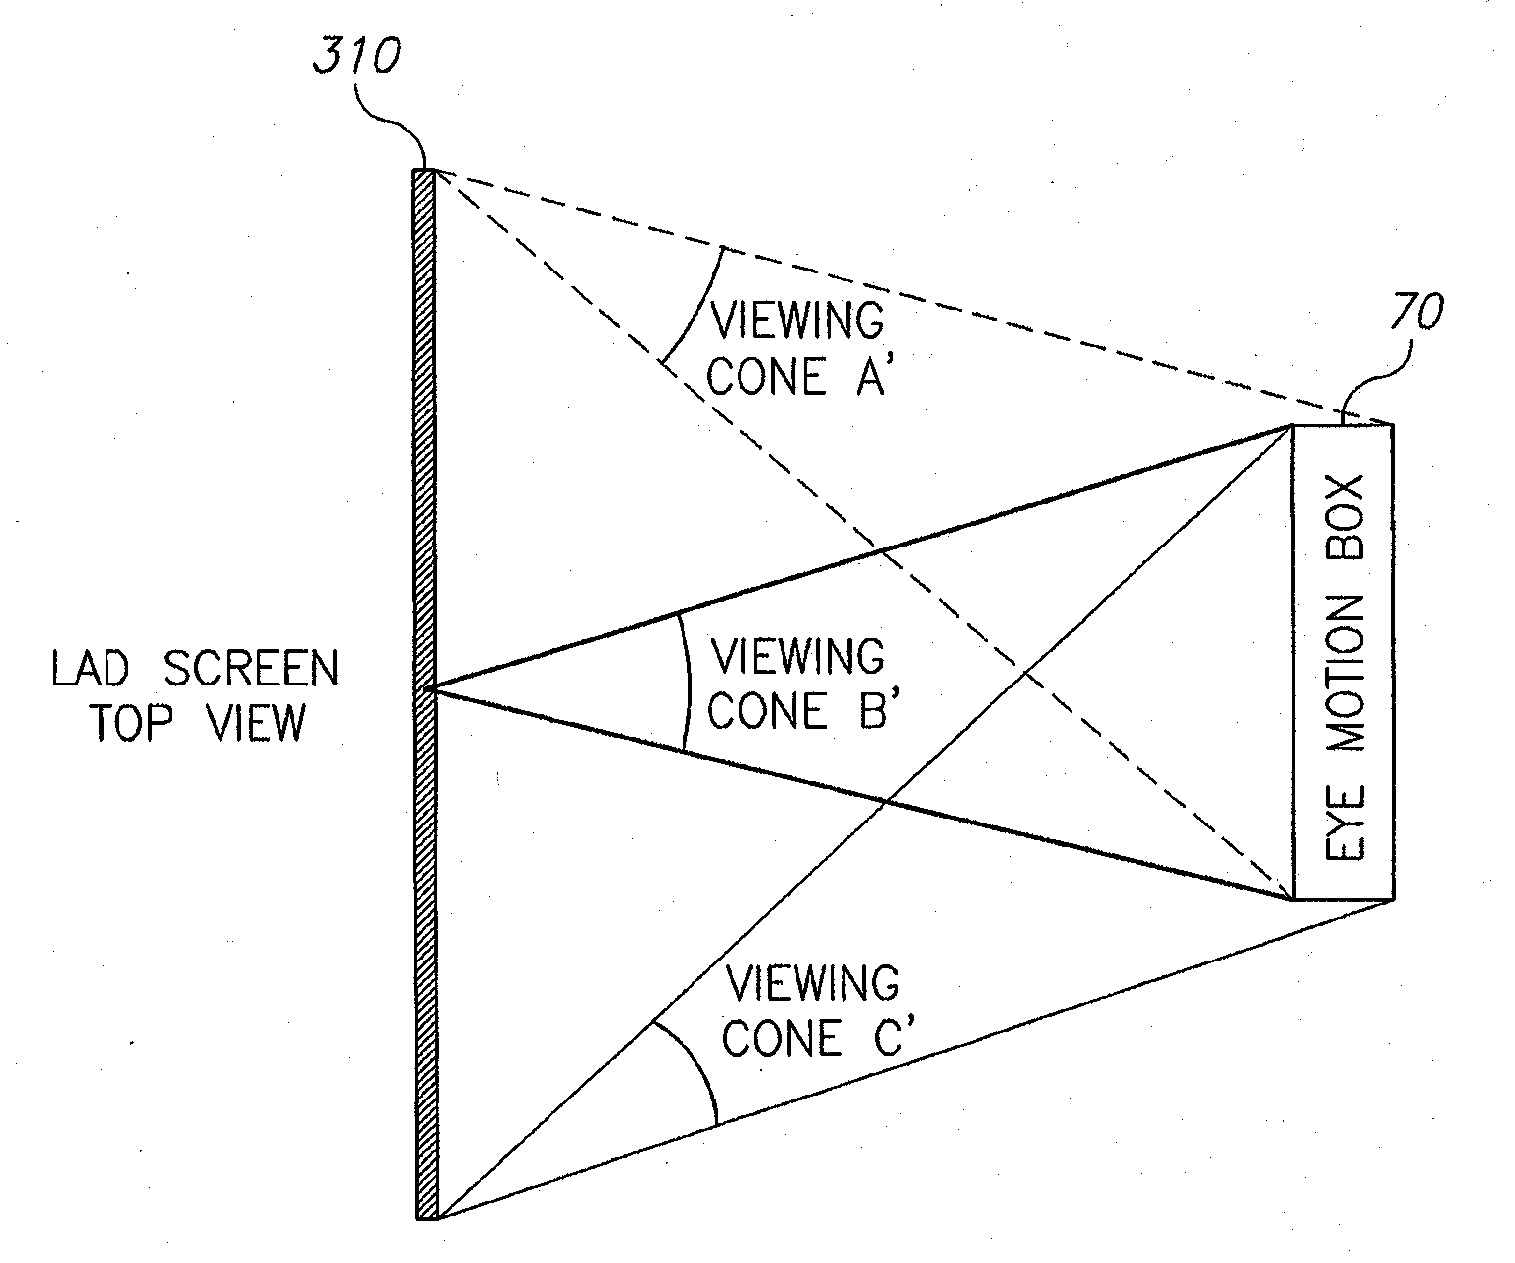 Electronic display designed for reduced reflections